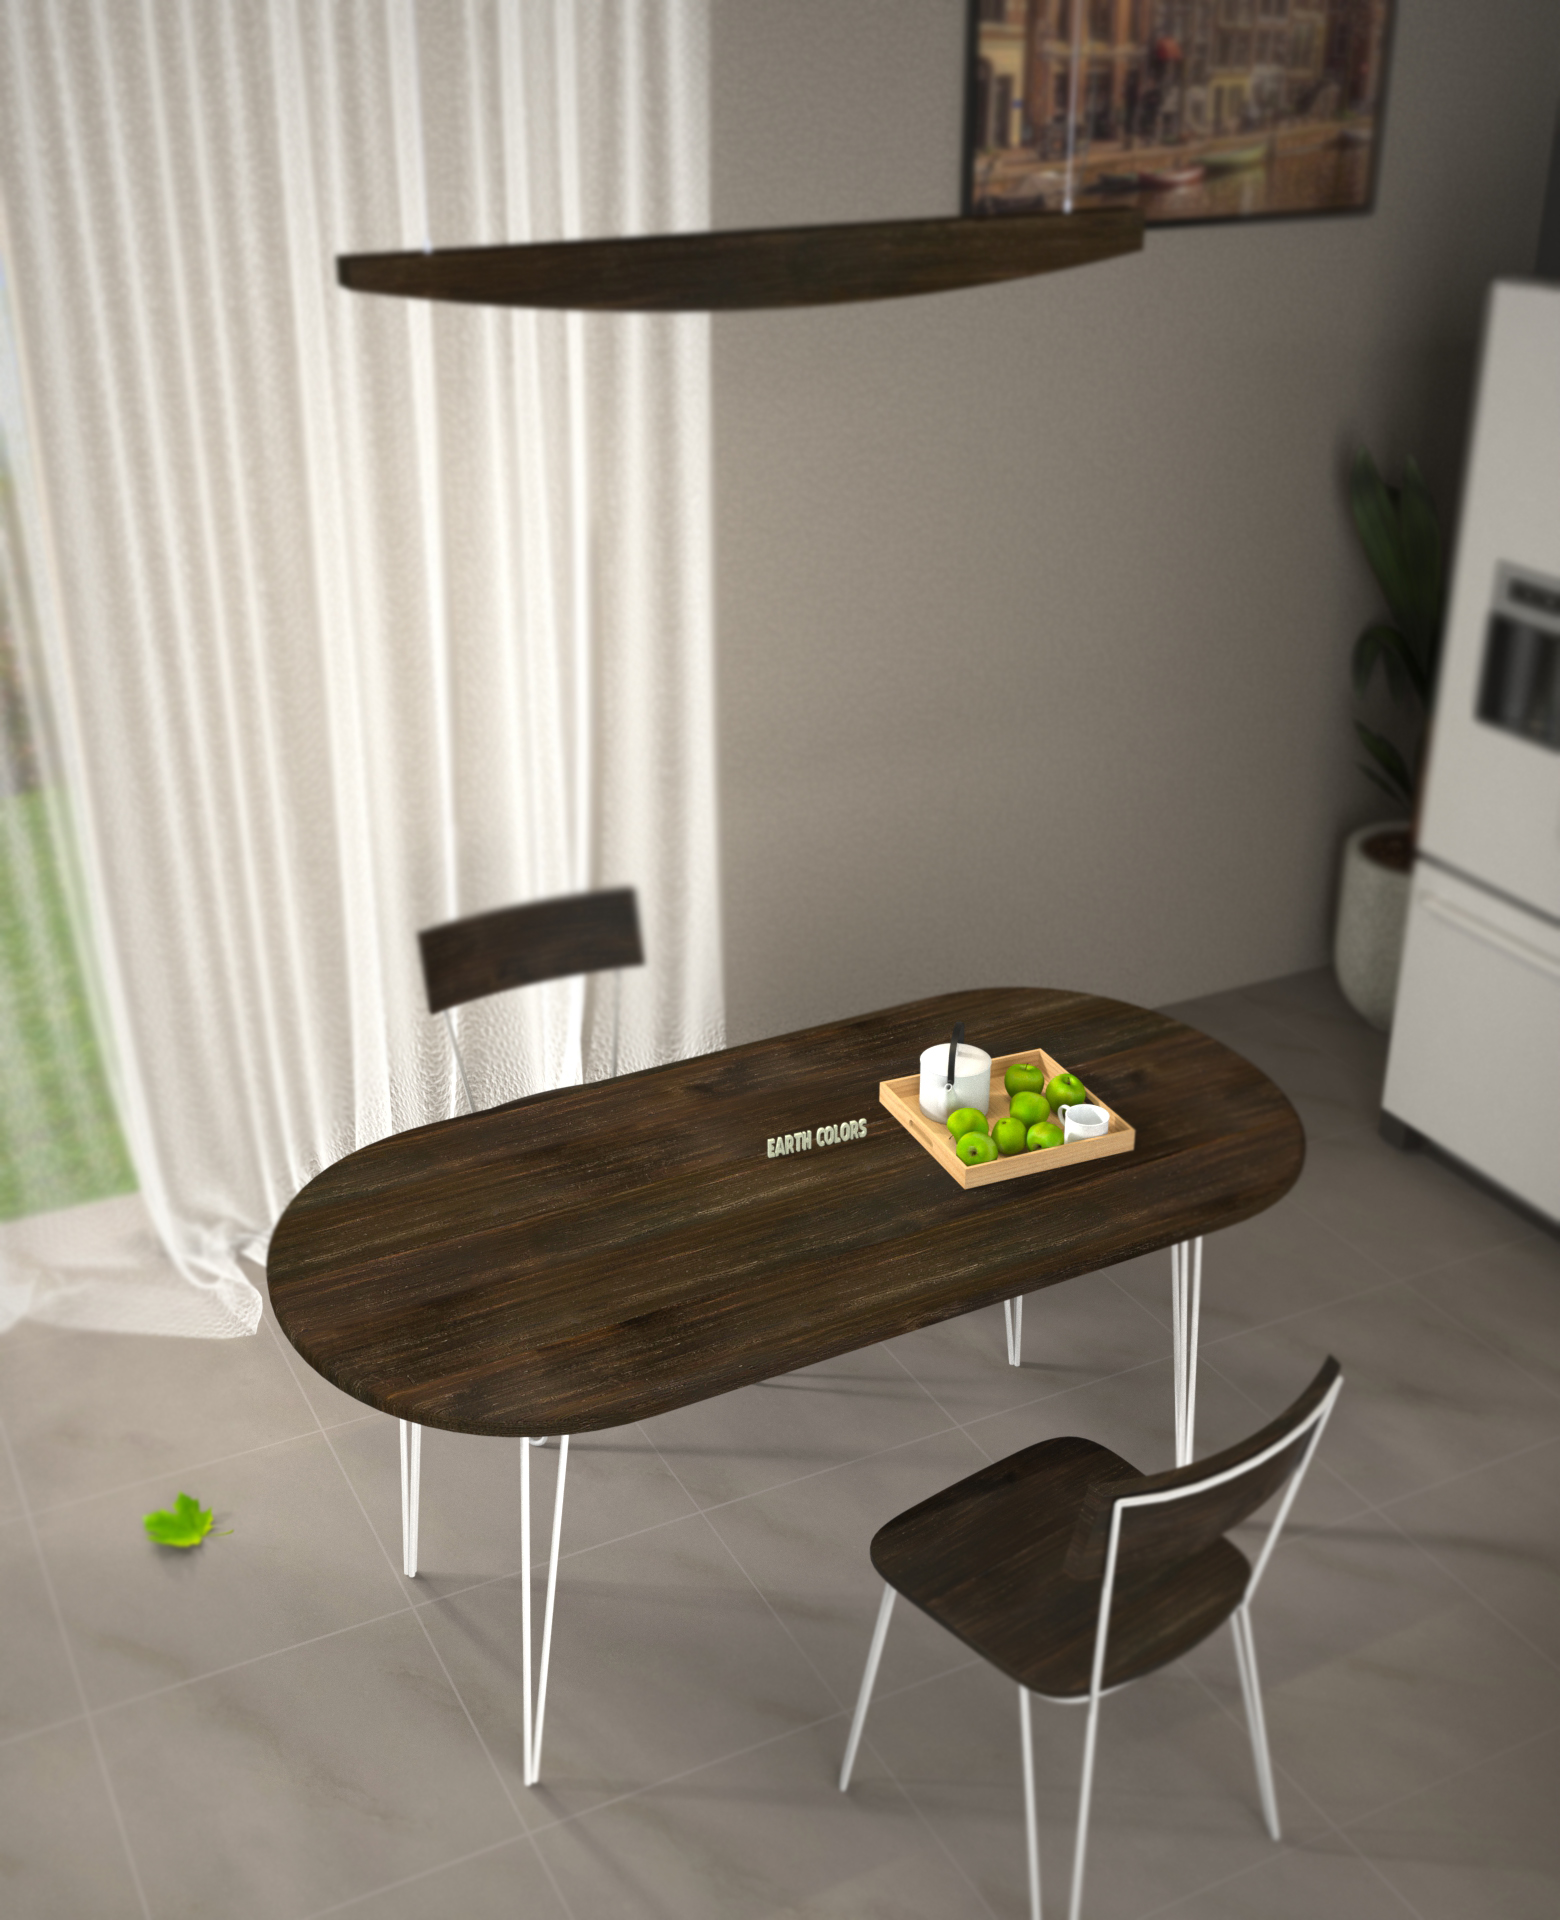 Get the Wooden dining room table at EARTHCOLORS